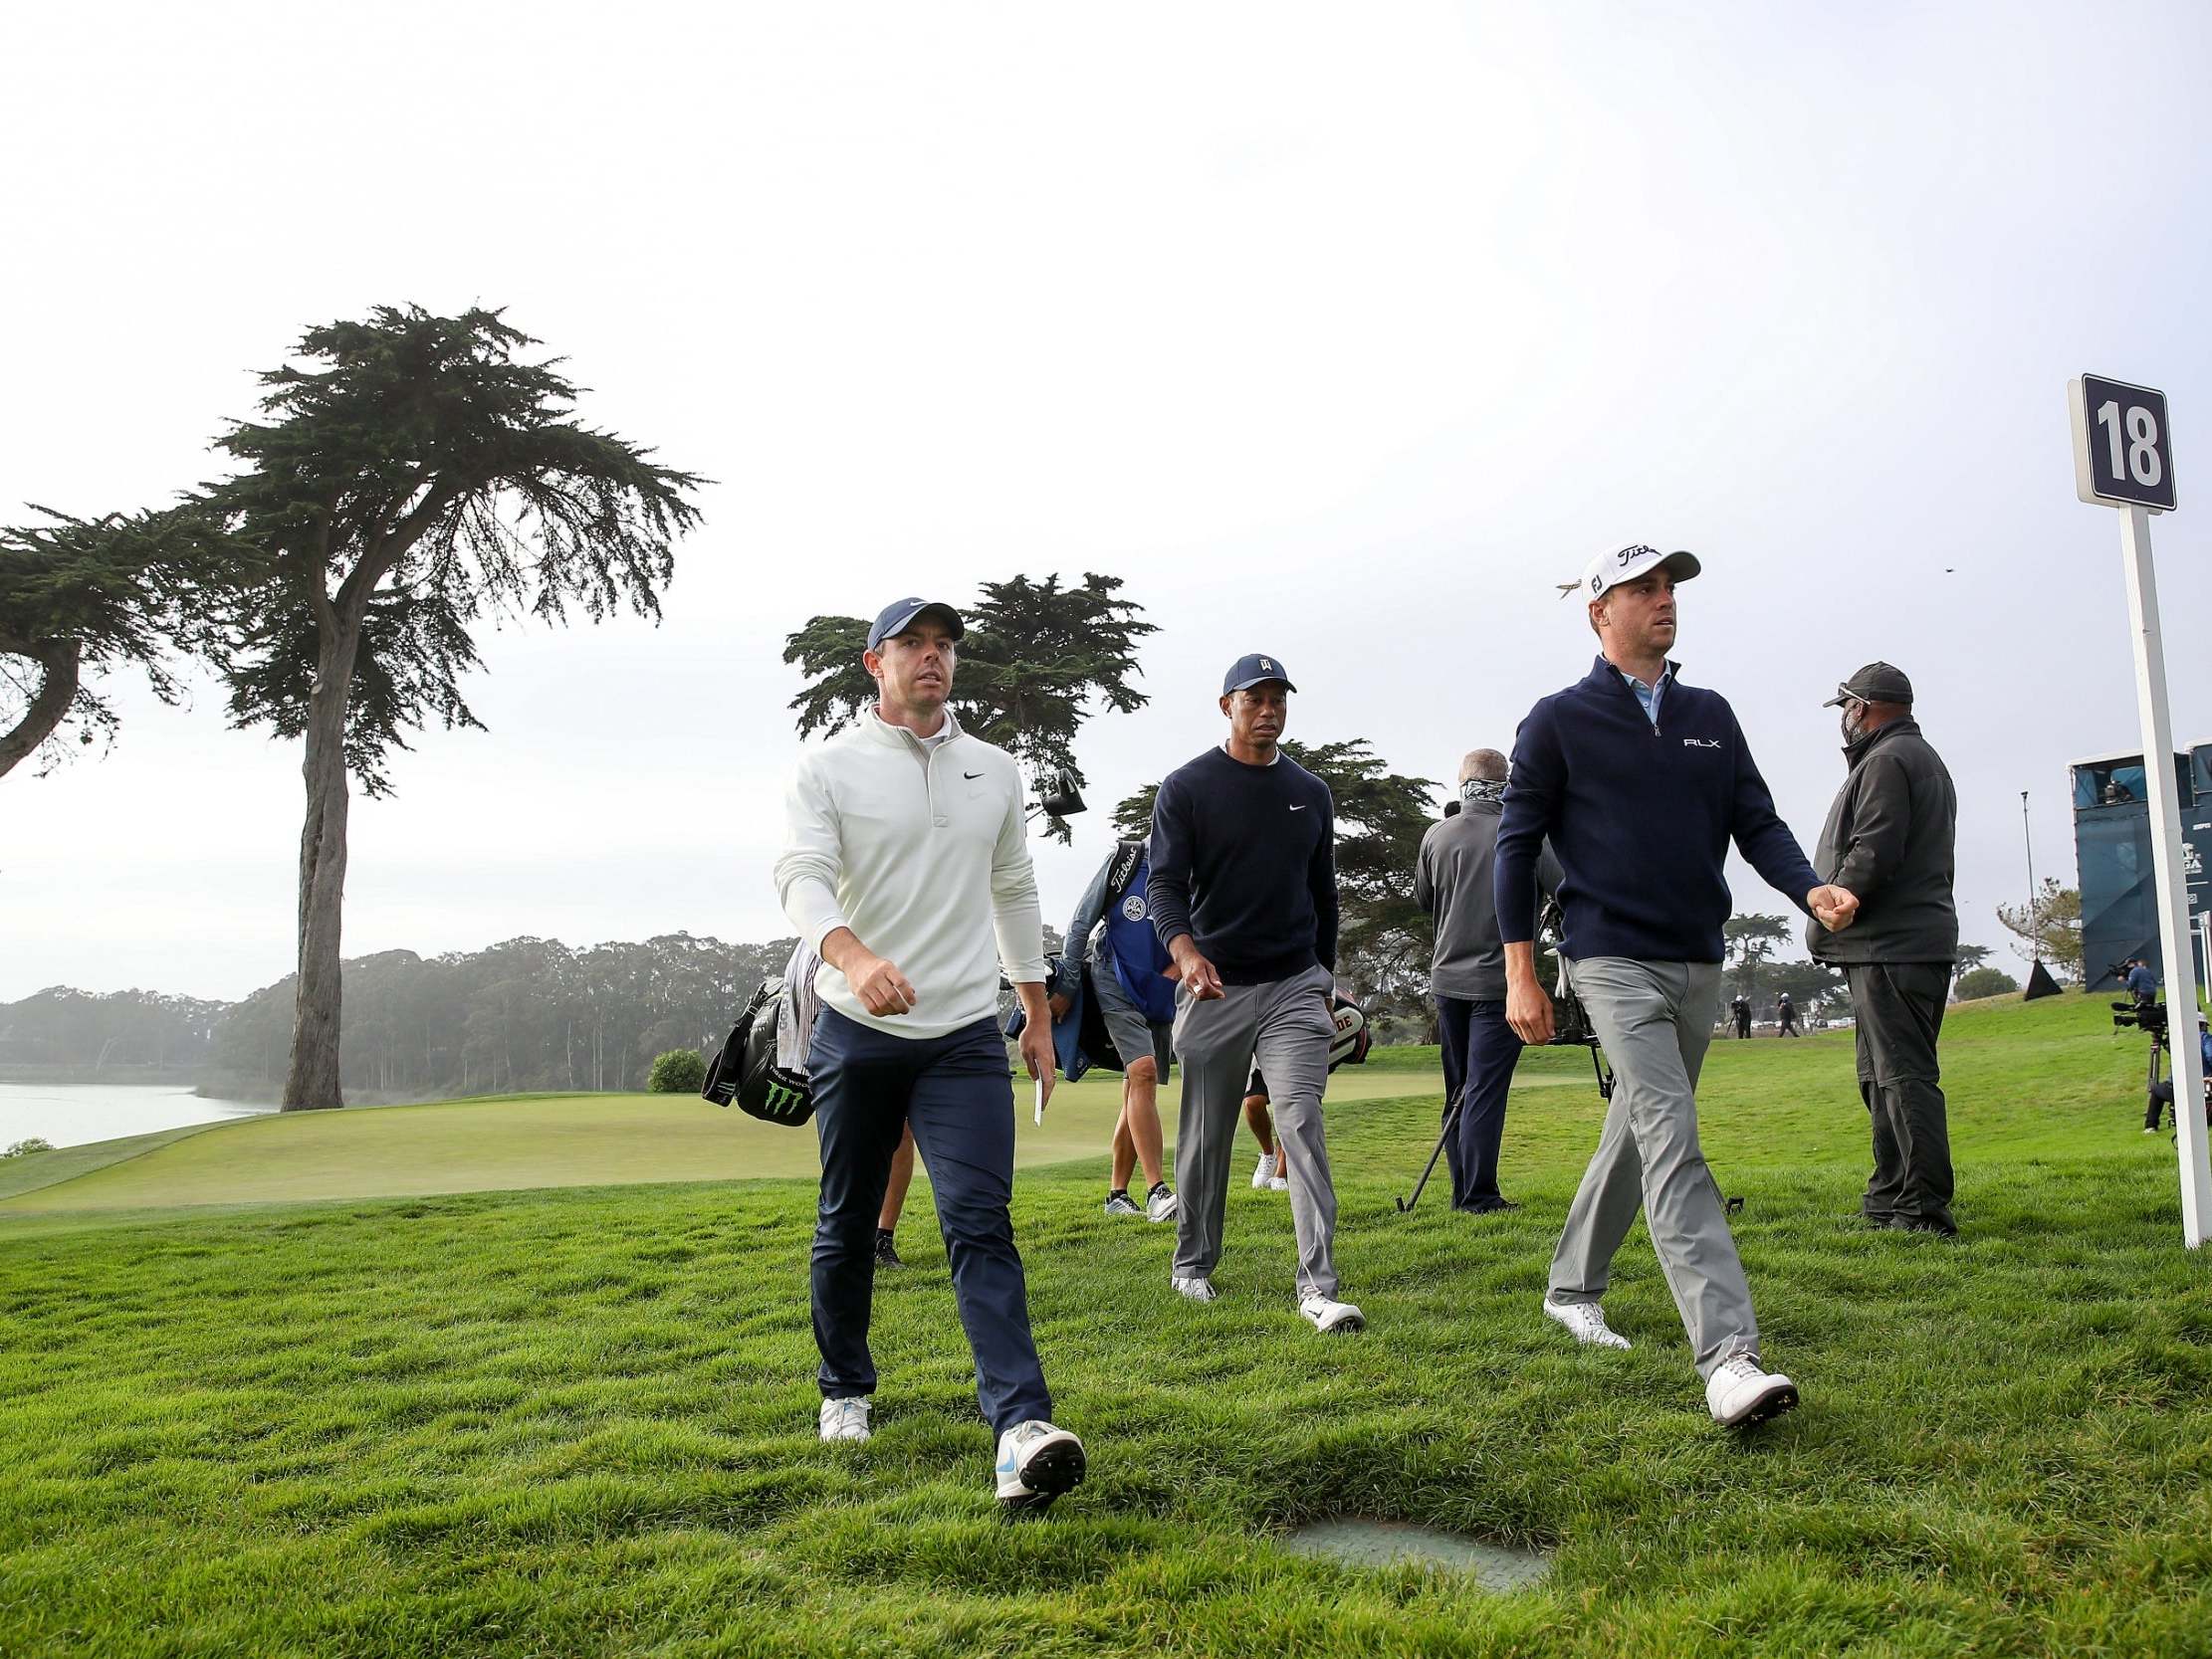 Rory McIlroy marches off the 18th green alongside Justin Thomas and Tiger Woods